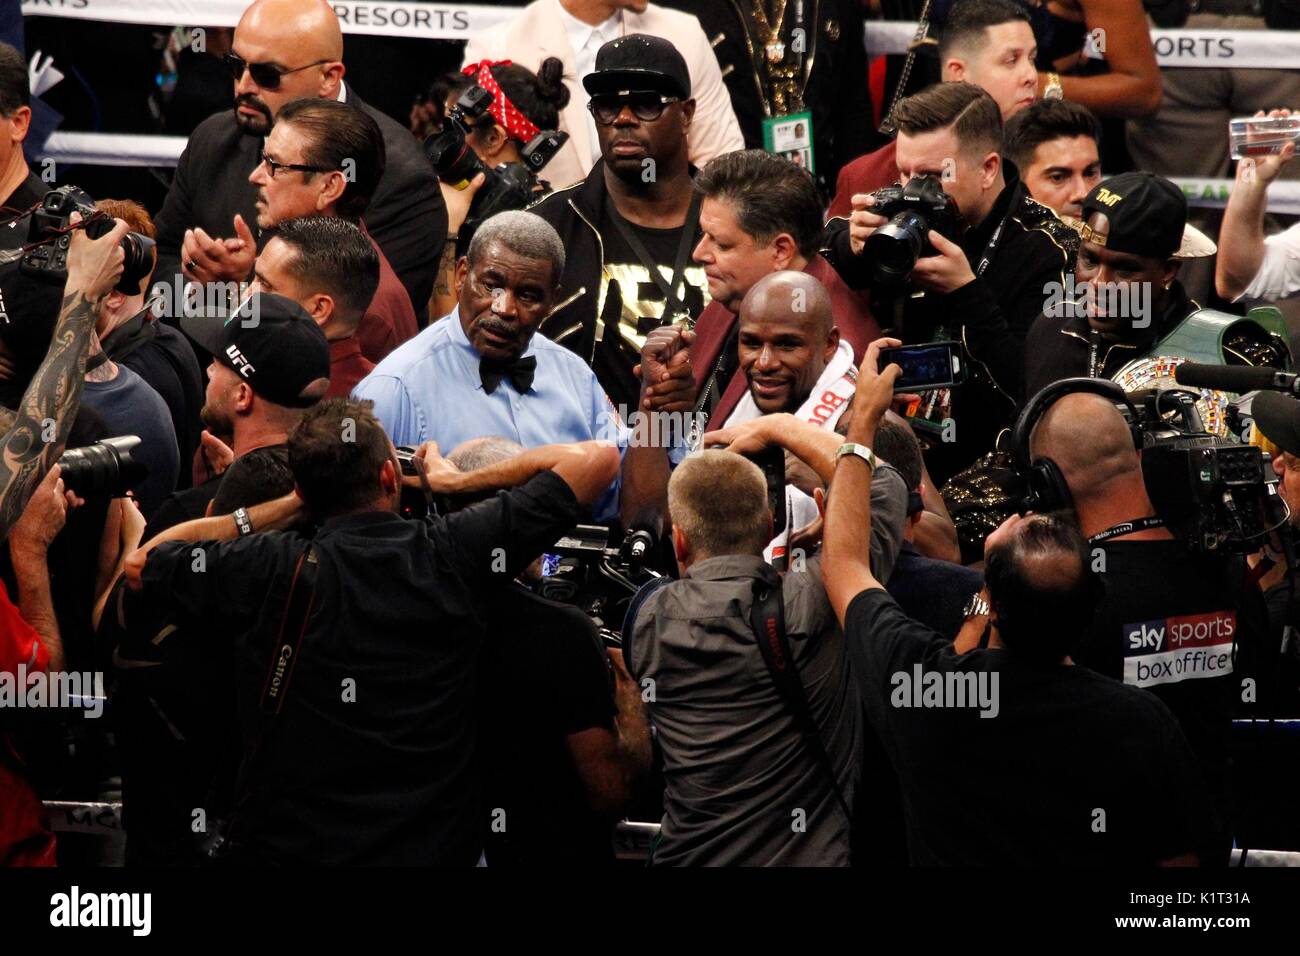 Las Vegas, NV, USA. 26th Aug, 2017. Referee Robert Byrd, Floyd Mayweather in attendance for Floyd Mayweather VS. Conor McGregor Fight, T-Mobile Arena, Las Vegas, NV August 26, 2017. Credit: JA/Everett Collection/Alamy Live News Stock Photo